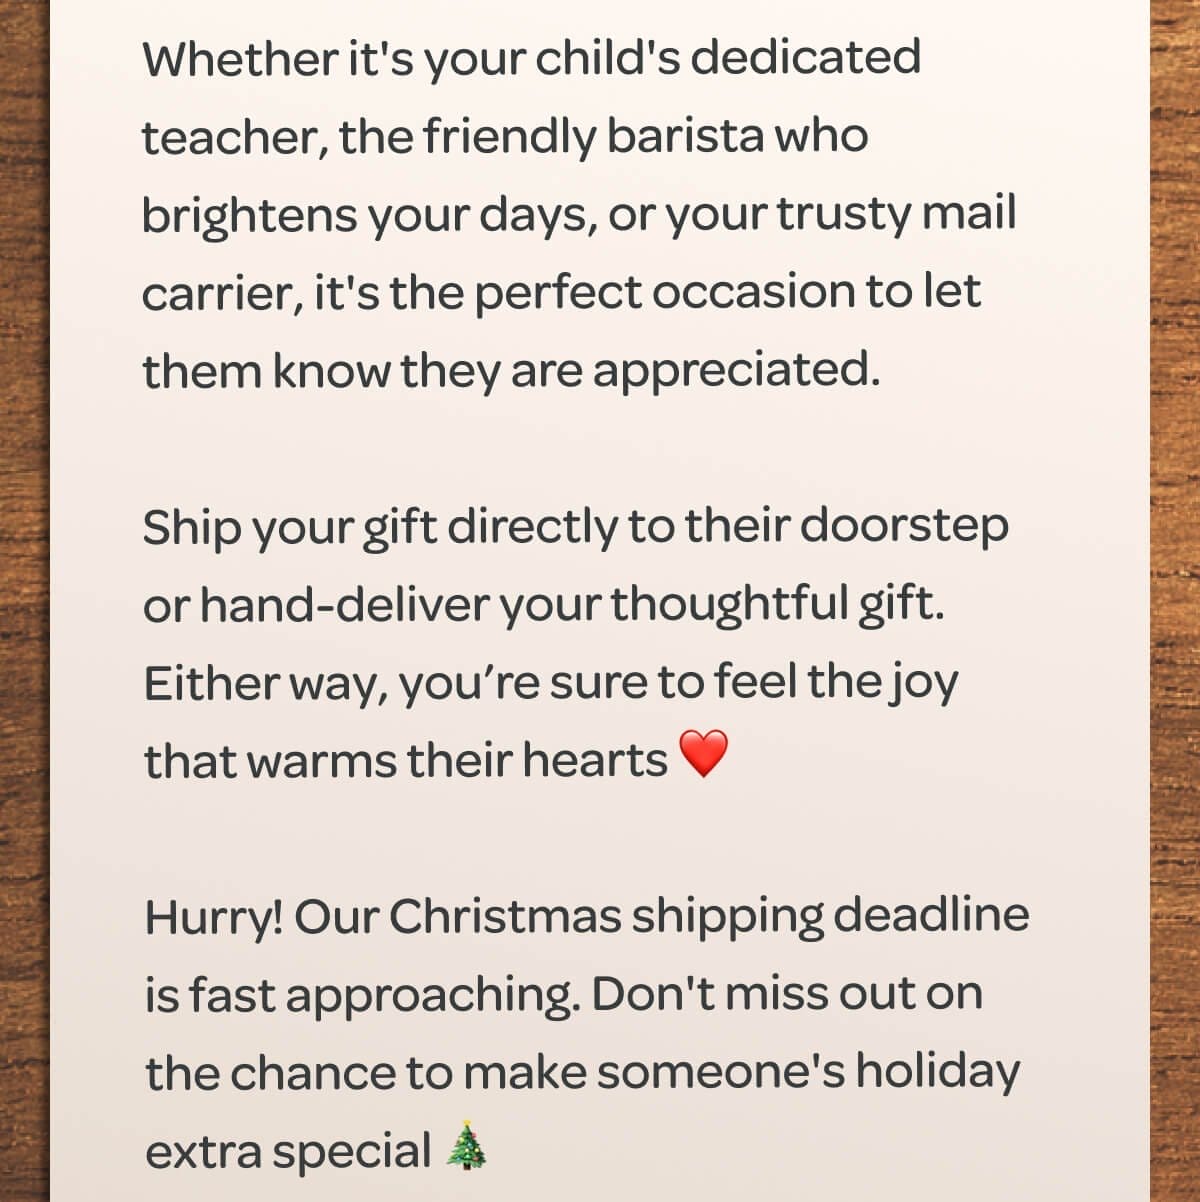 Whether it's your child's dedicated teacher, the friendly barista who brightens your days, or your trusty mail carrier, it's the perfect occasion to let them know they are appreciated. Ship your gift directly to their doorstep or hand-deliver your thoughtful gift. Either way, you’re sure to feel the joy that warms their hearts ❤️ Hurry! Our Christmas shipping deadline is fast approaching. Don't miss out on the chance to make someone's holiday extra special 🎄